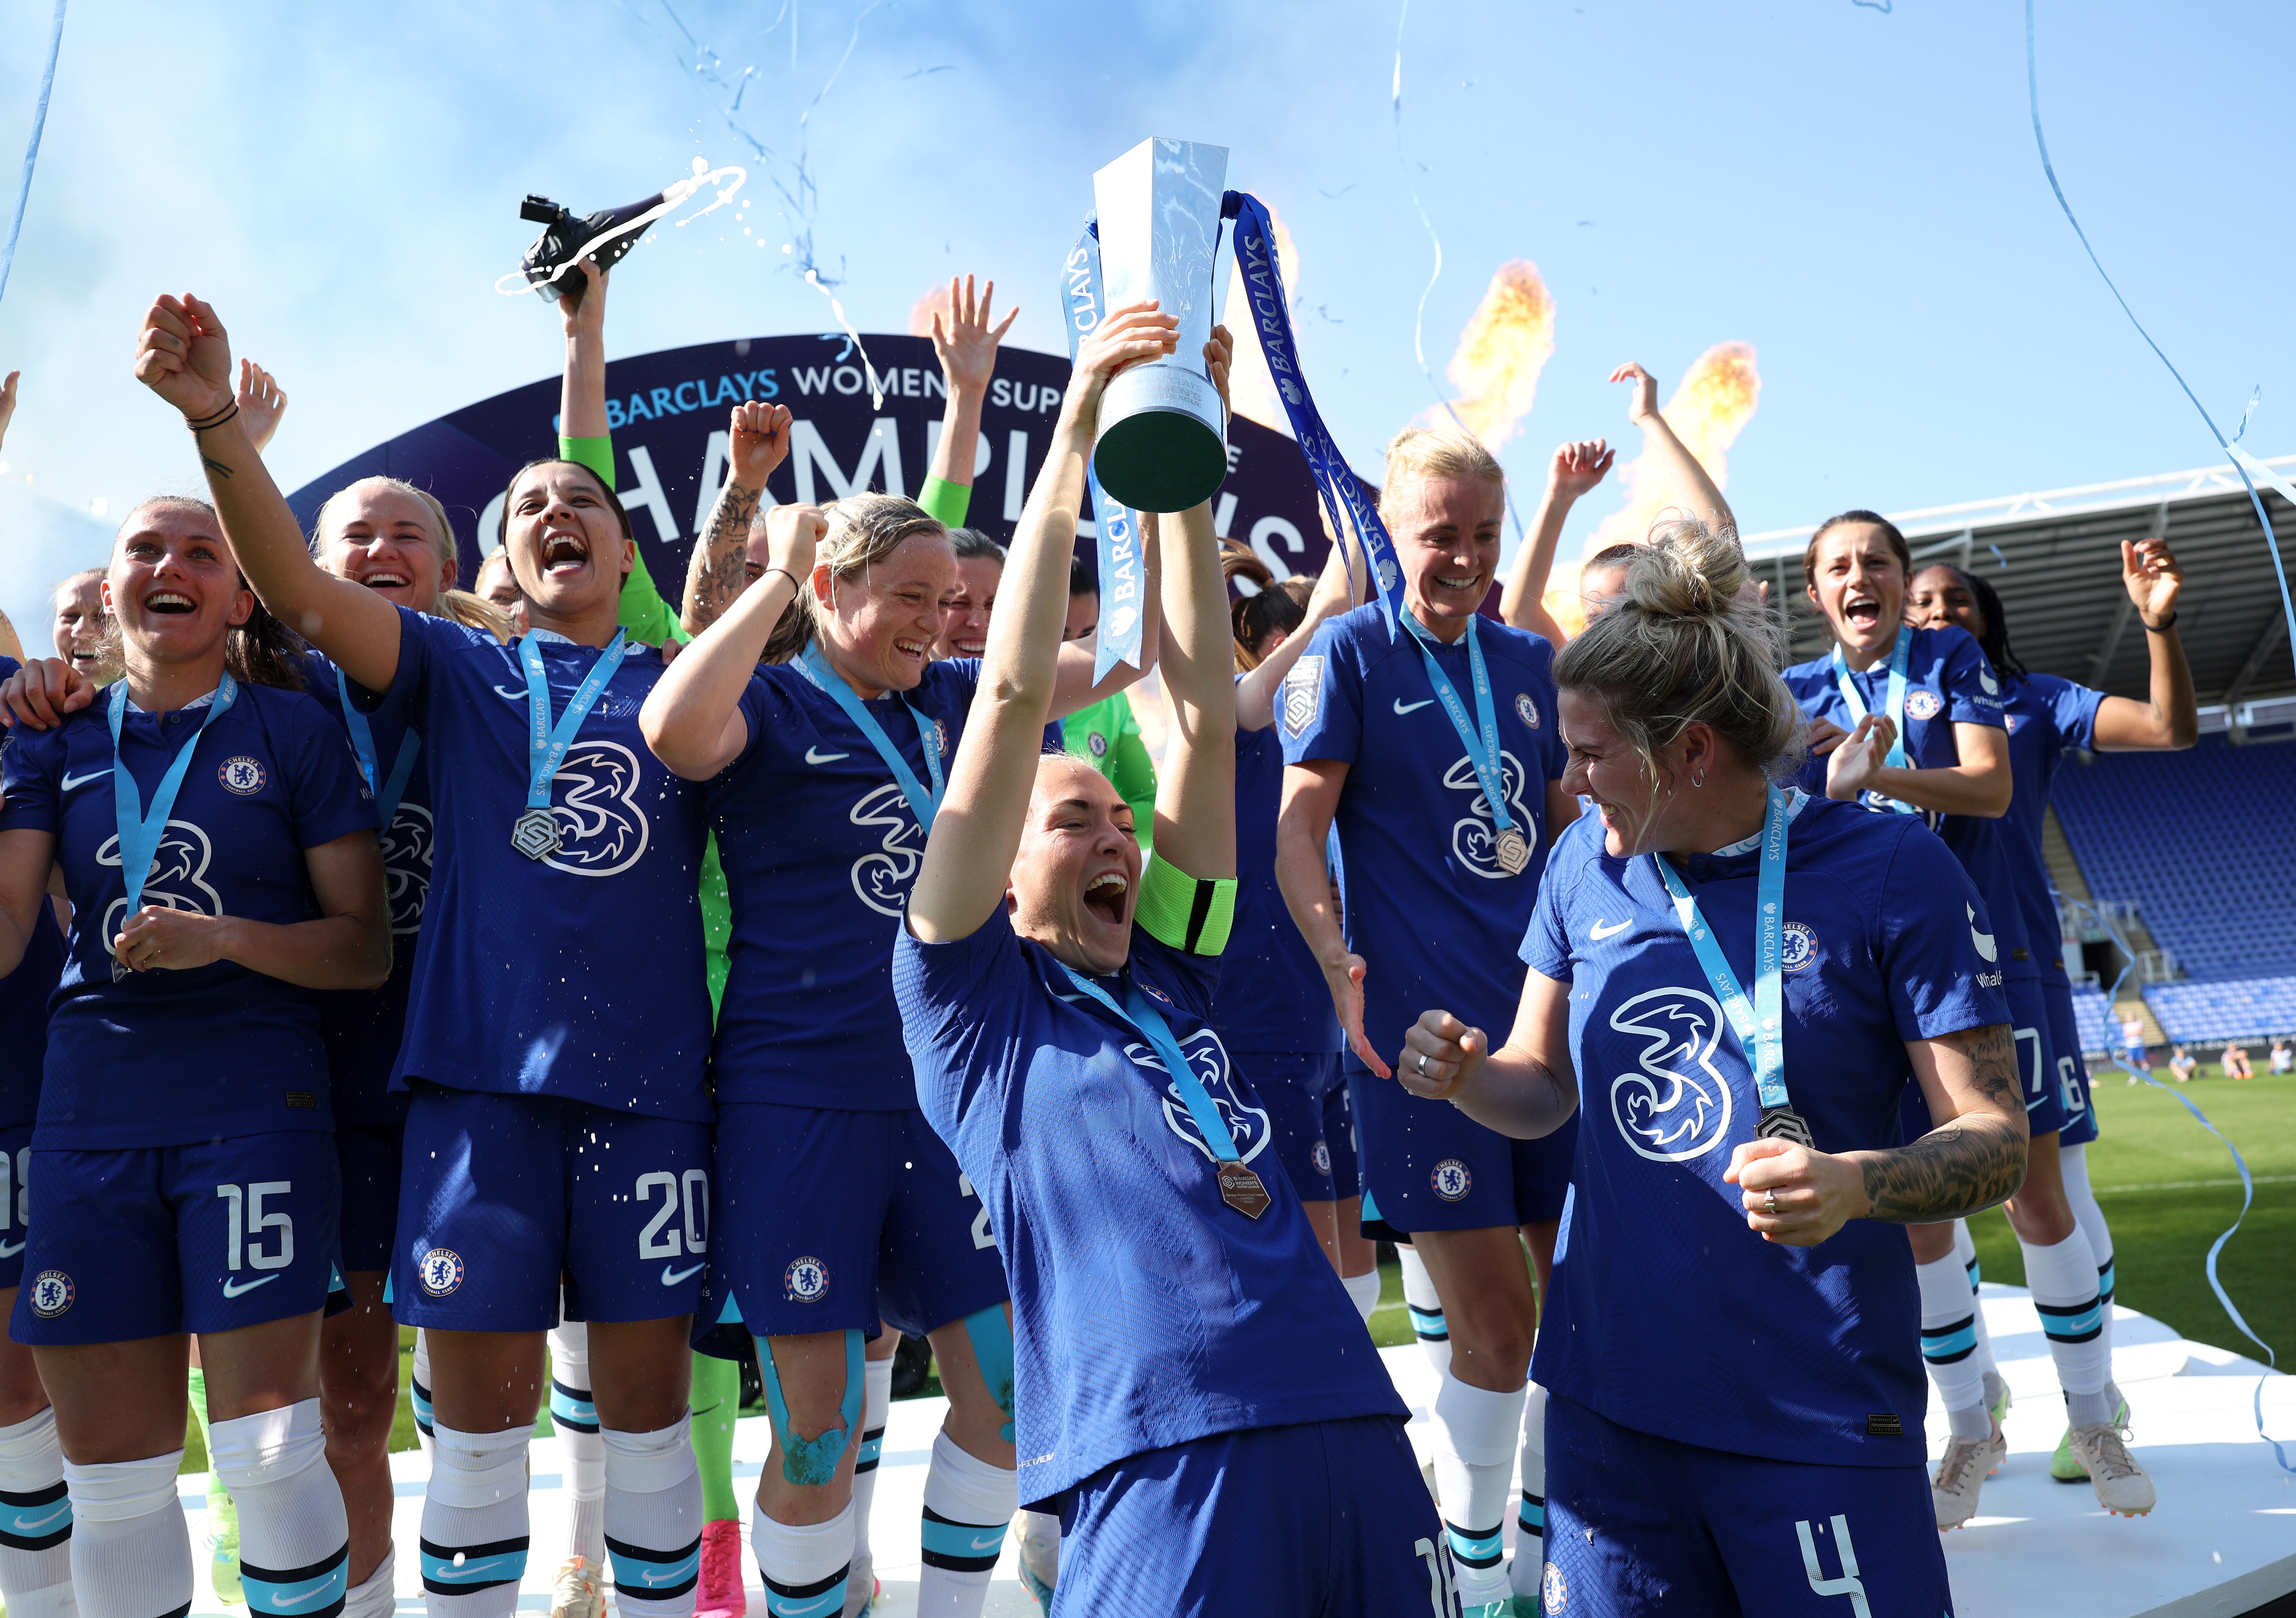 Chelsea won their fourth consecutive WSL last season, edging Manchester United to the title